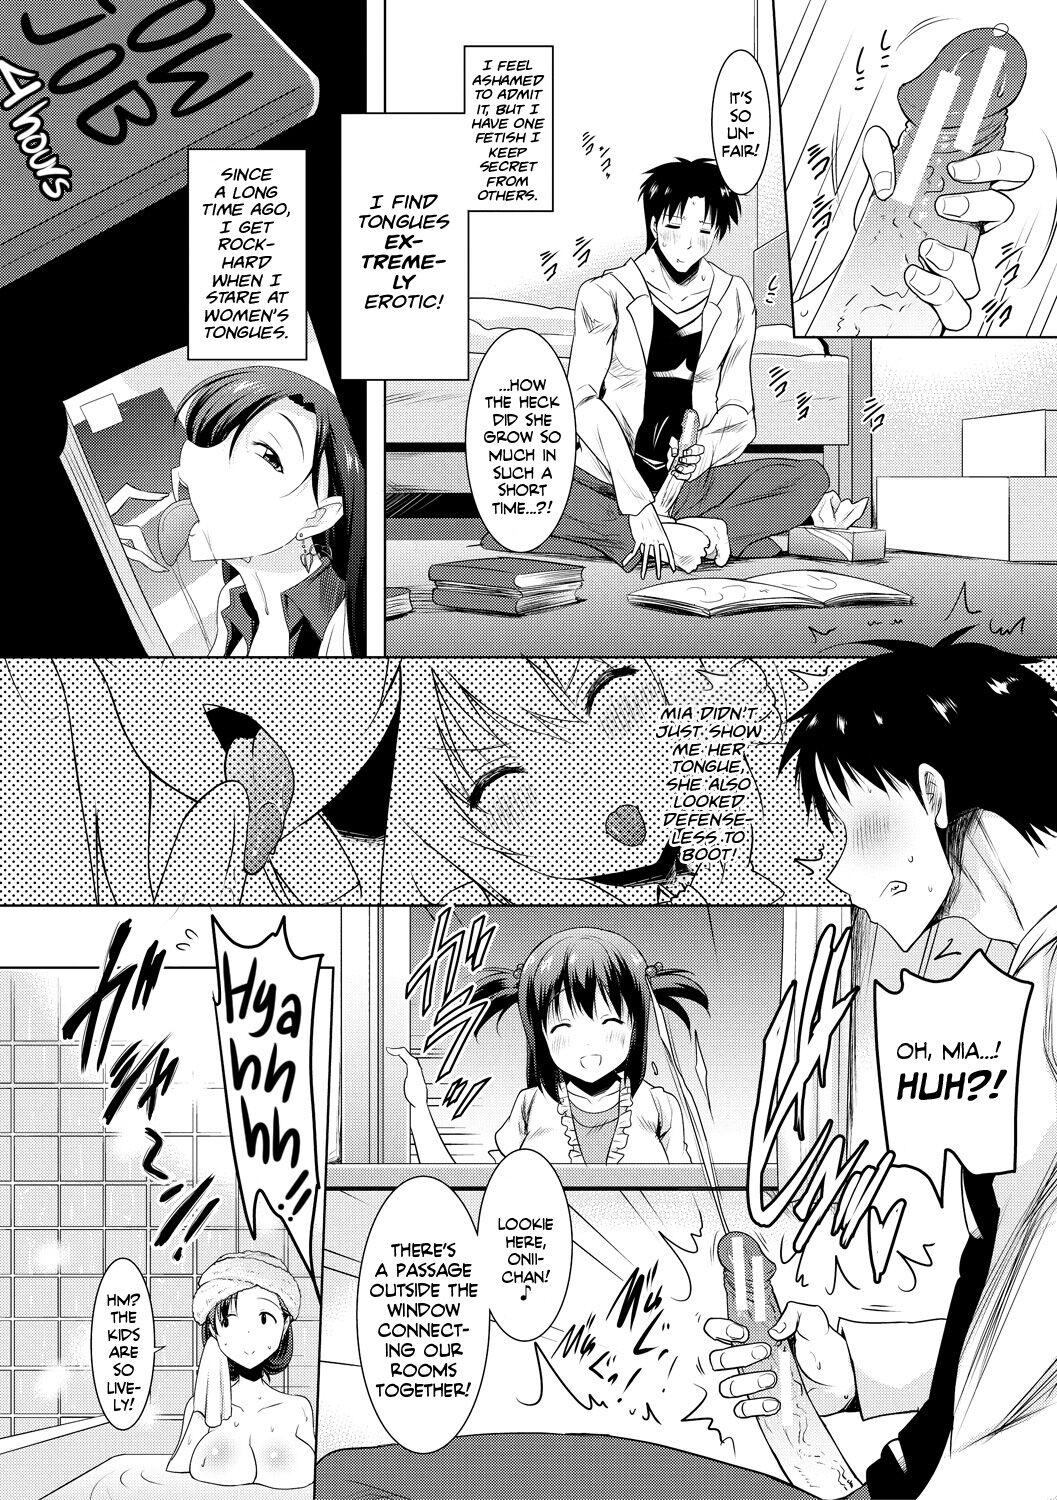 [Pony-R] I Can't Live Without My Little Sister's Tongue Chapter 01-02 + Secret Baby-making Sex with a Big-titted Mother and Daughter! (Kyonyuu Oyako no Shita to Shikyuu ni Renzoku Shasei) [English] [Team Rabu2] [Digital] 8